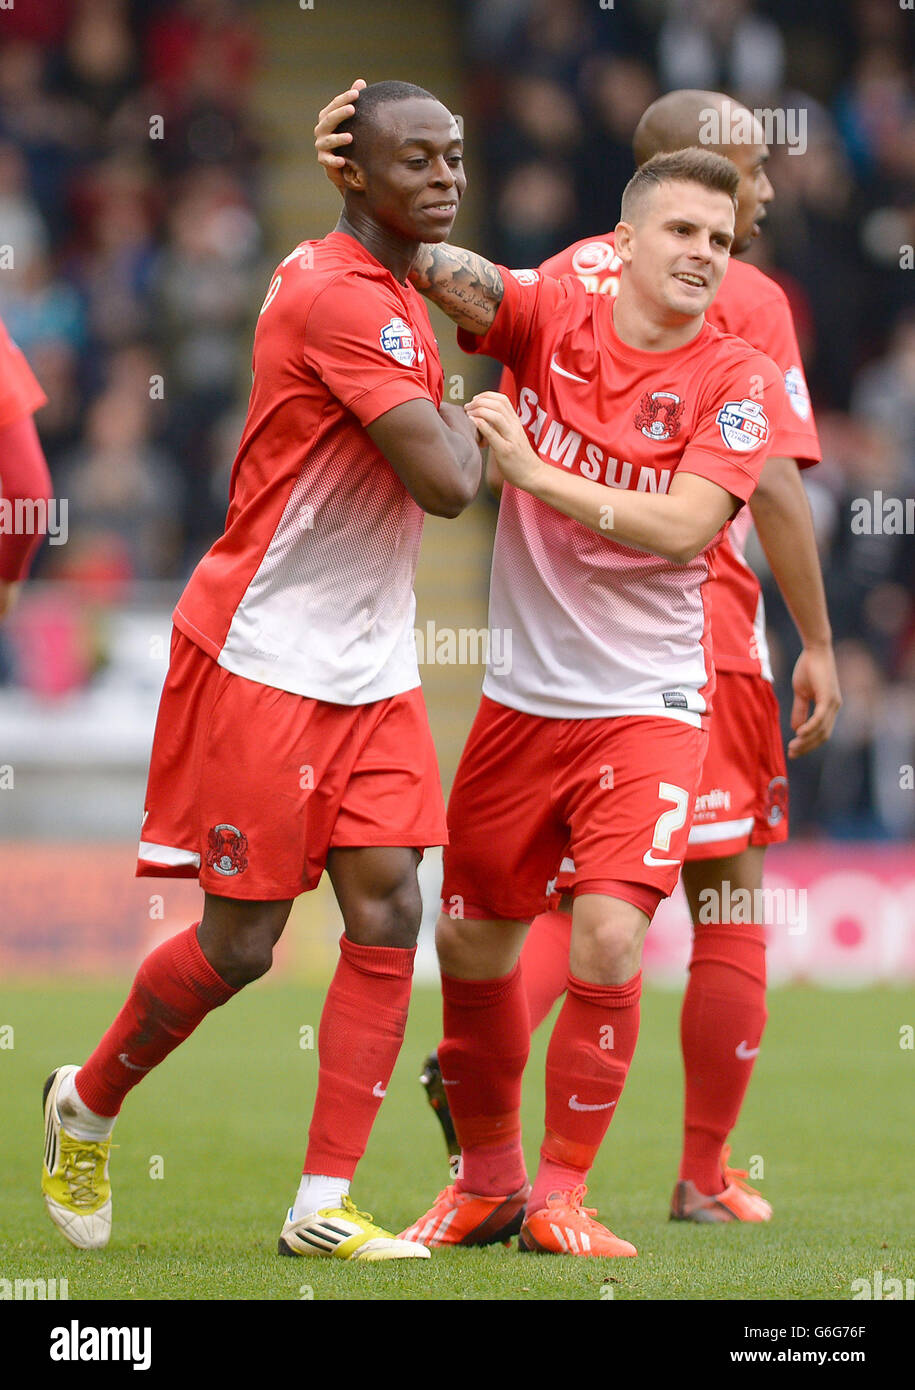 Leyton Orient's Moses Odubajo (left) celebrates scoring his side's first goal with team mate Dean Cox during the Sky Bet League One match at the Matchroom Stadium, London. Stock Photo